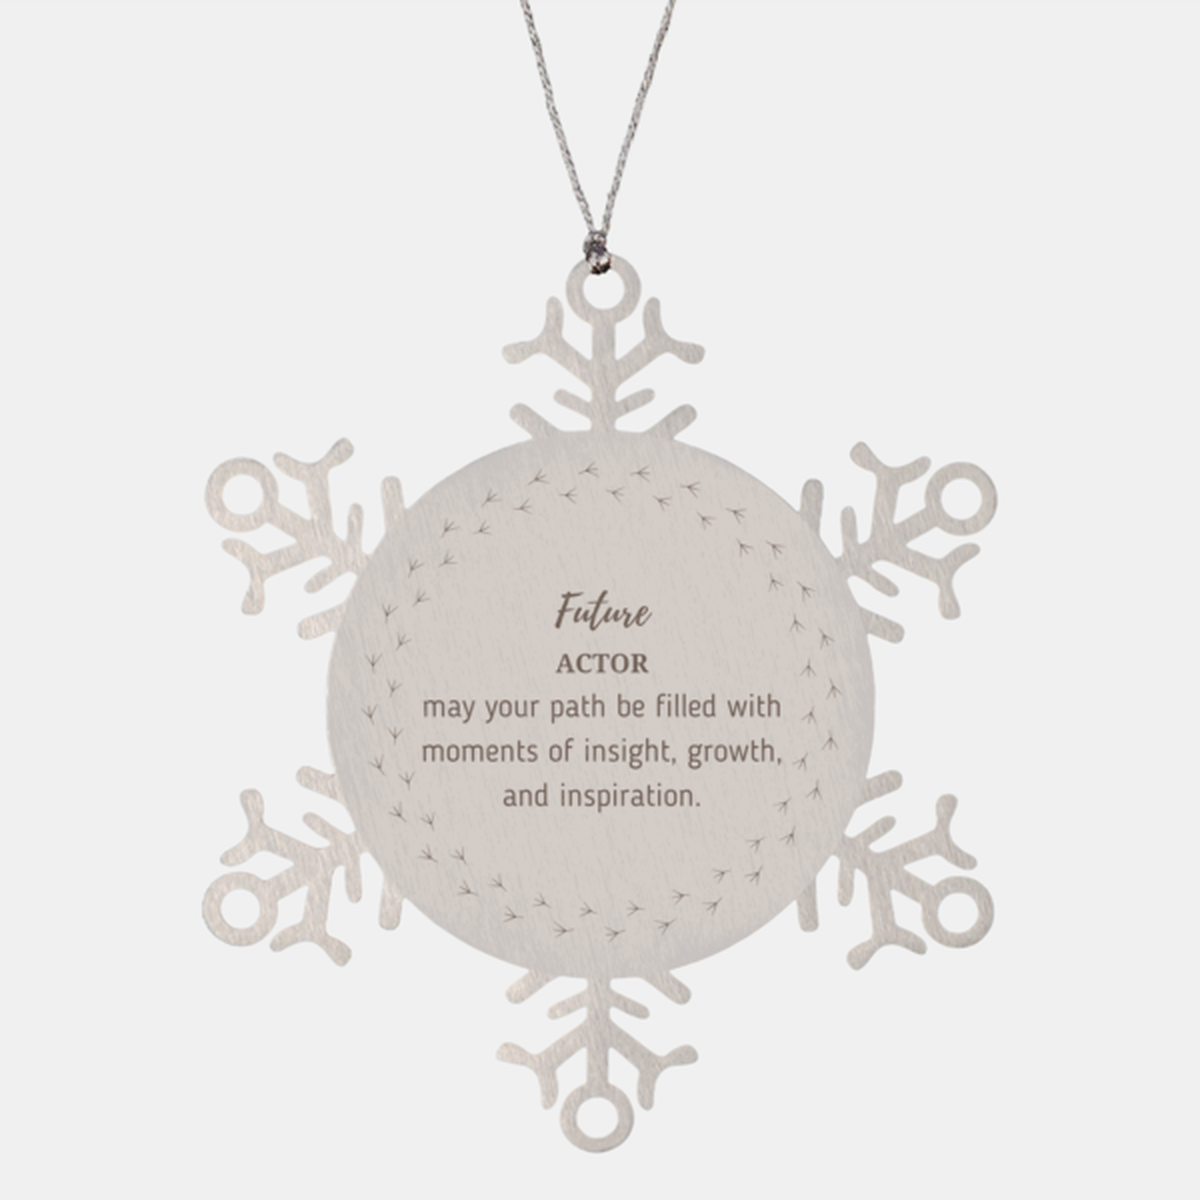 Future Actor Gifts, May your path be filled with moments of insight, Graduation Gifts for New Actor, Christmas Unique Snowflake Ornament For Men, Women, Friends